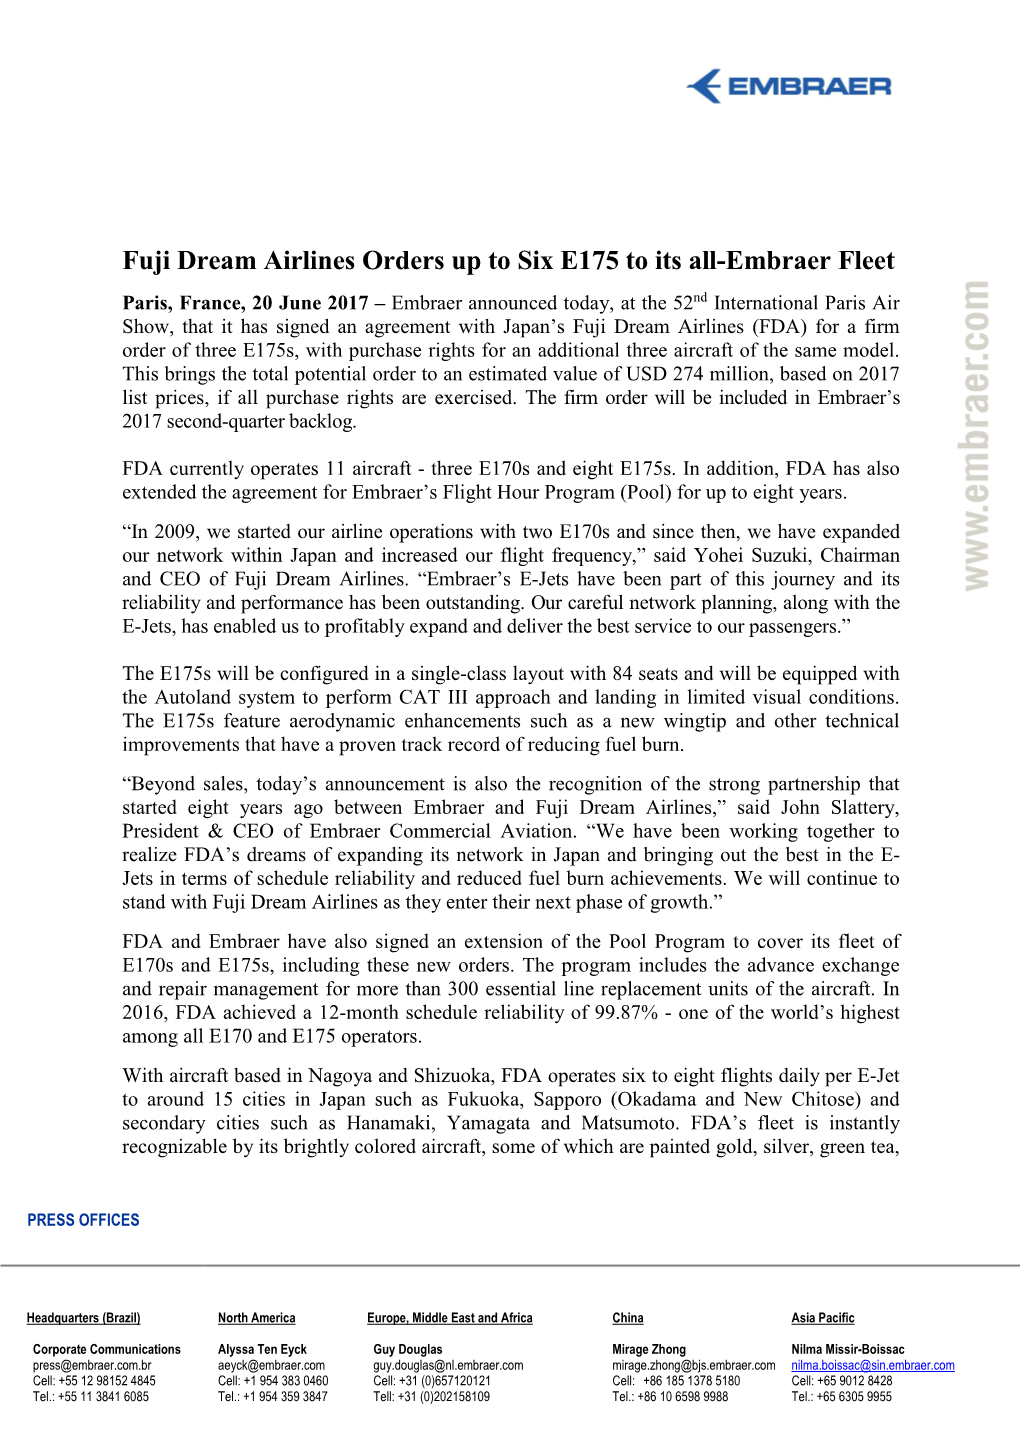 Fuji Dream Airlines Orders up to Six E175 to Its All-Embraer Fleet